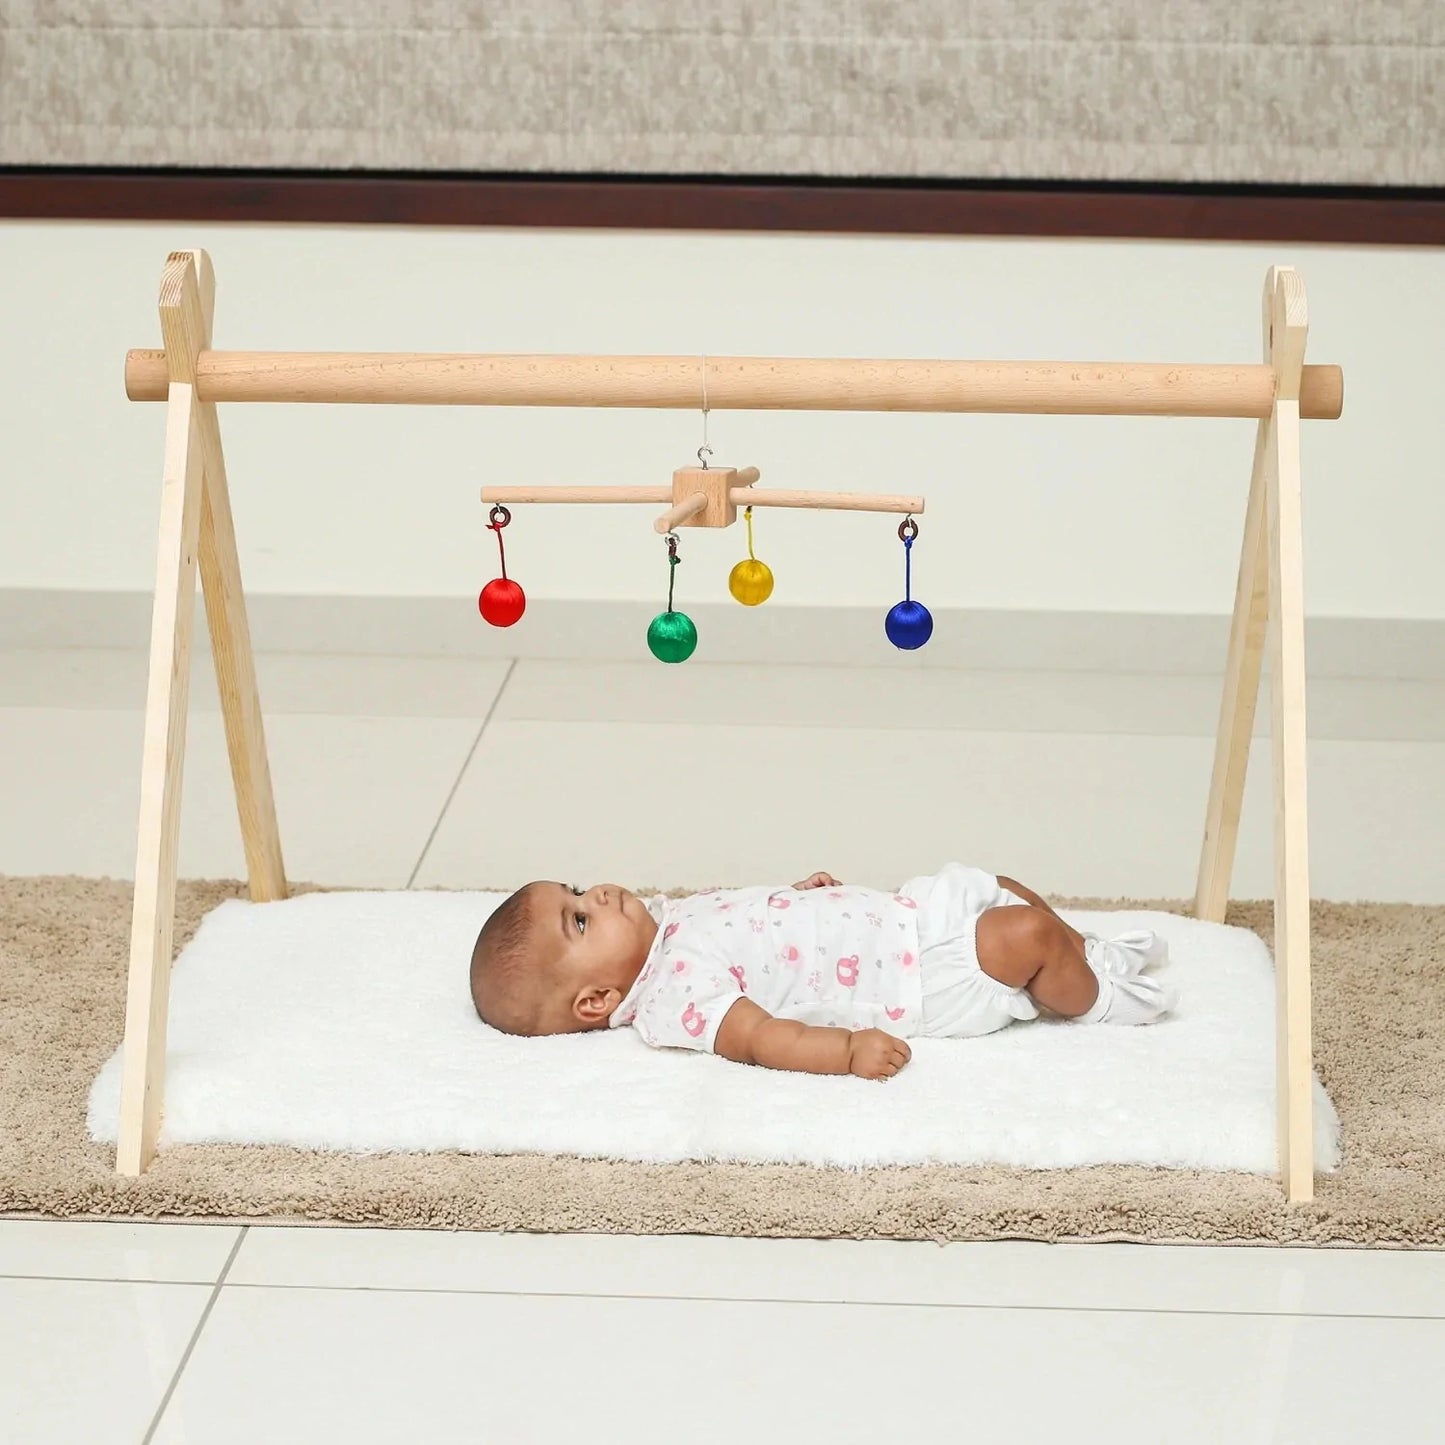 Buy Activity Gym with 3 Mobiles with Hanger for Newborn Baby - Colourful Mobiles - SkilloToys.com